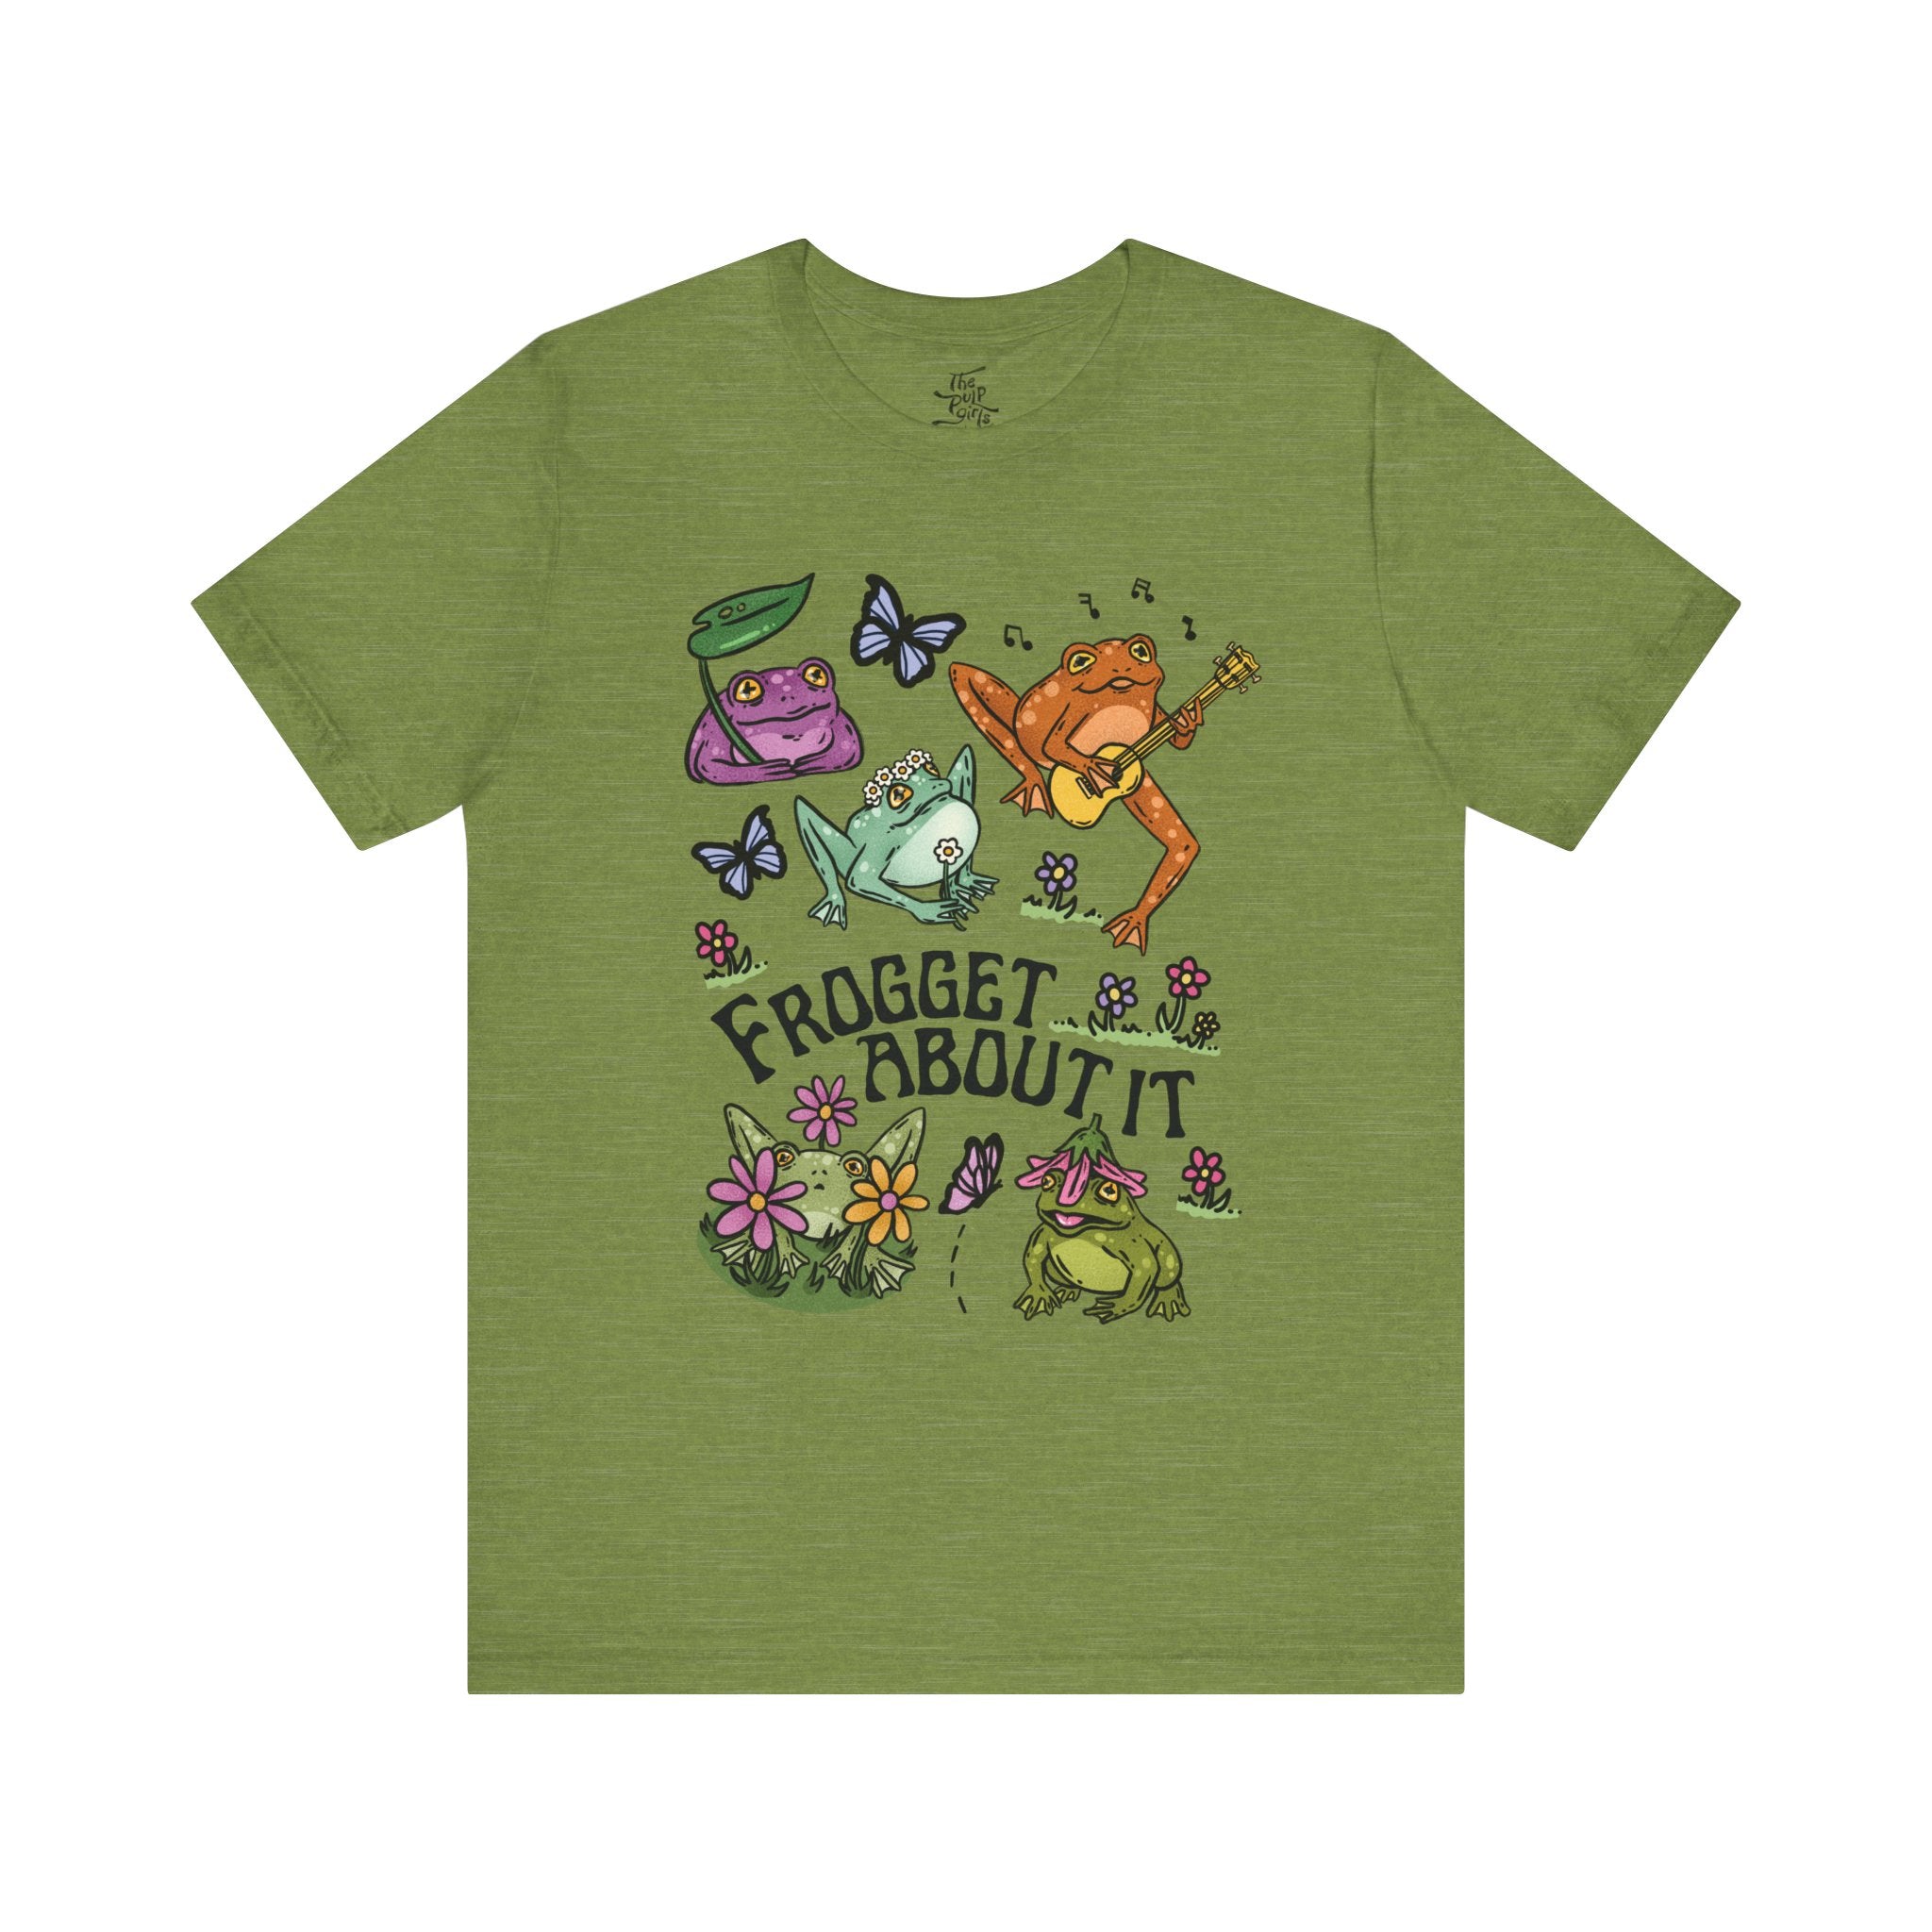 Frogget About It Tee